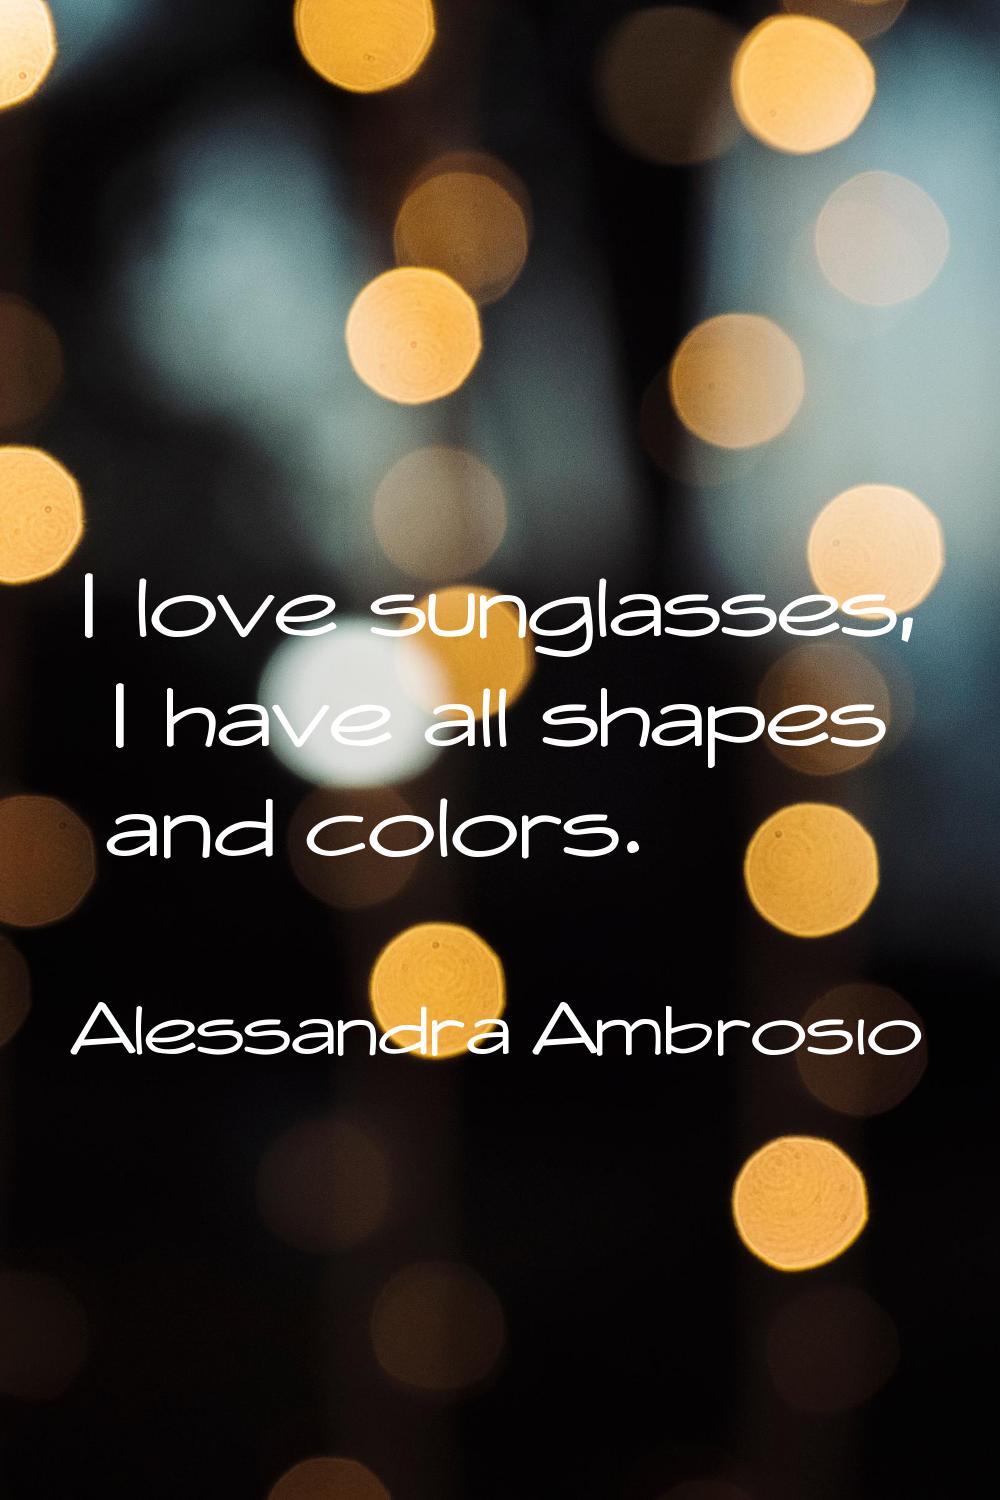 I love sunglasses, I have all shapes and colors.